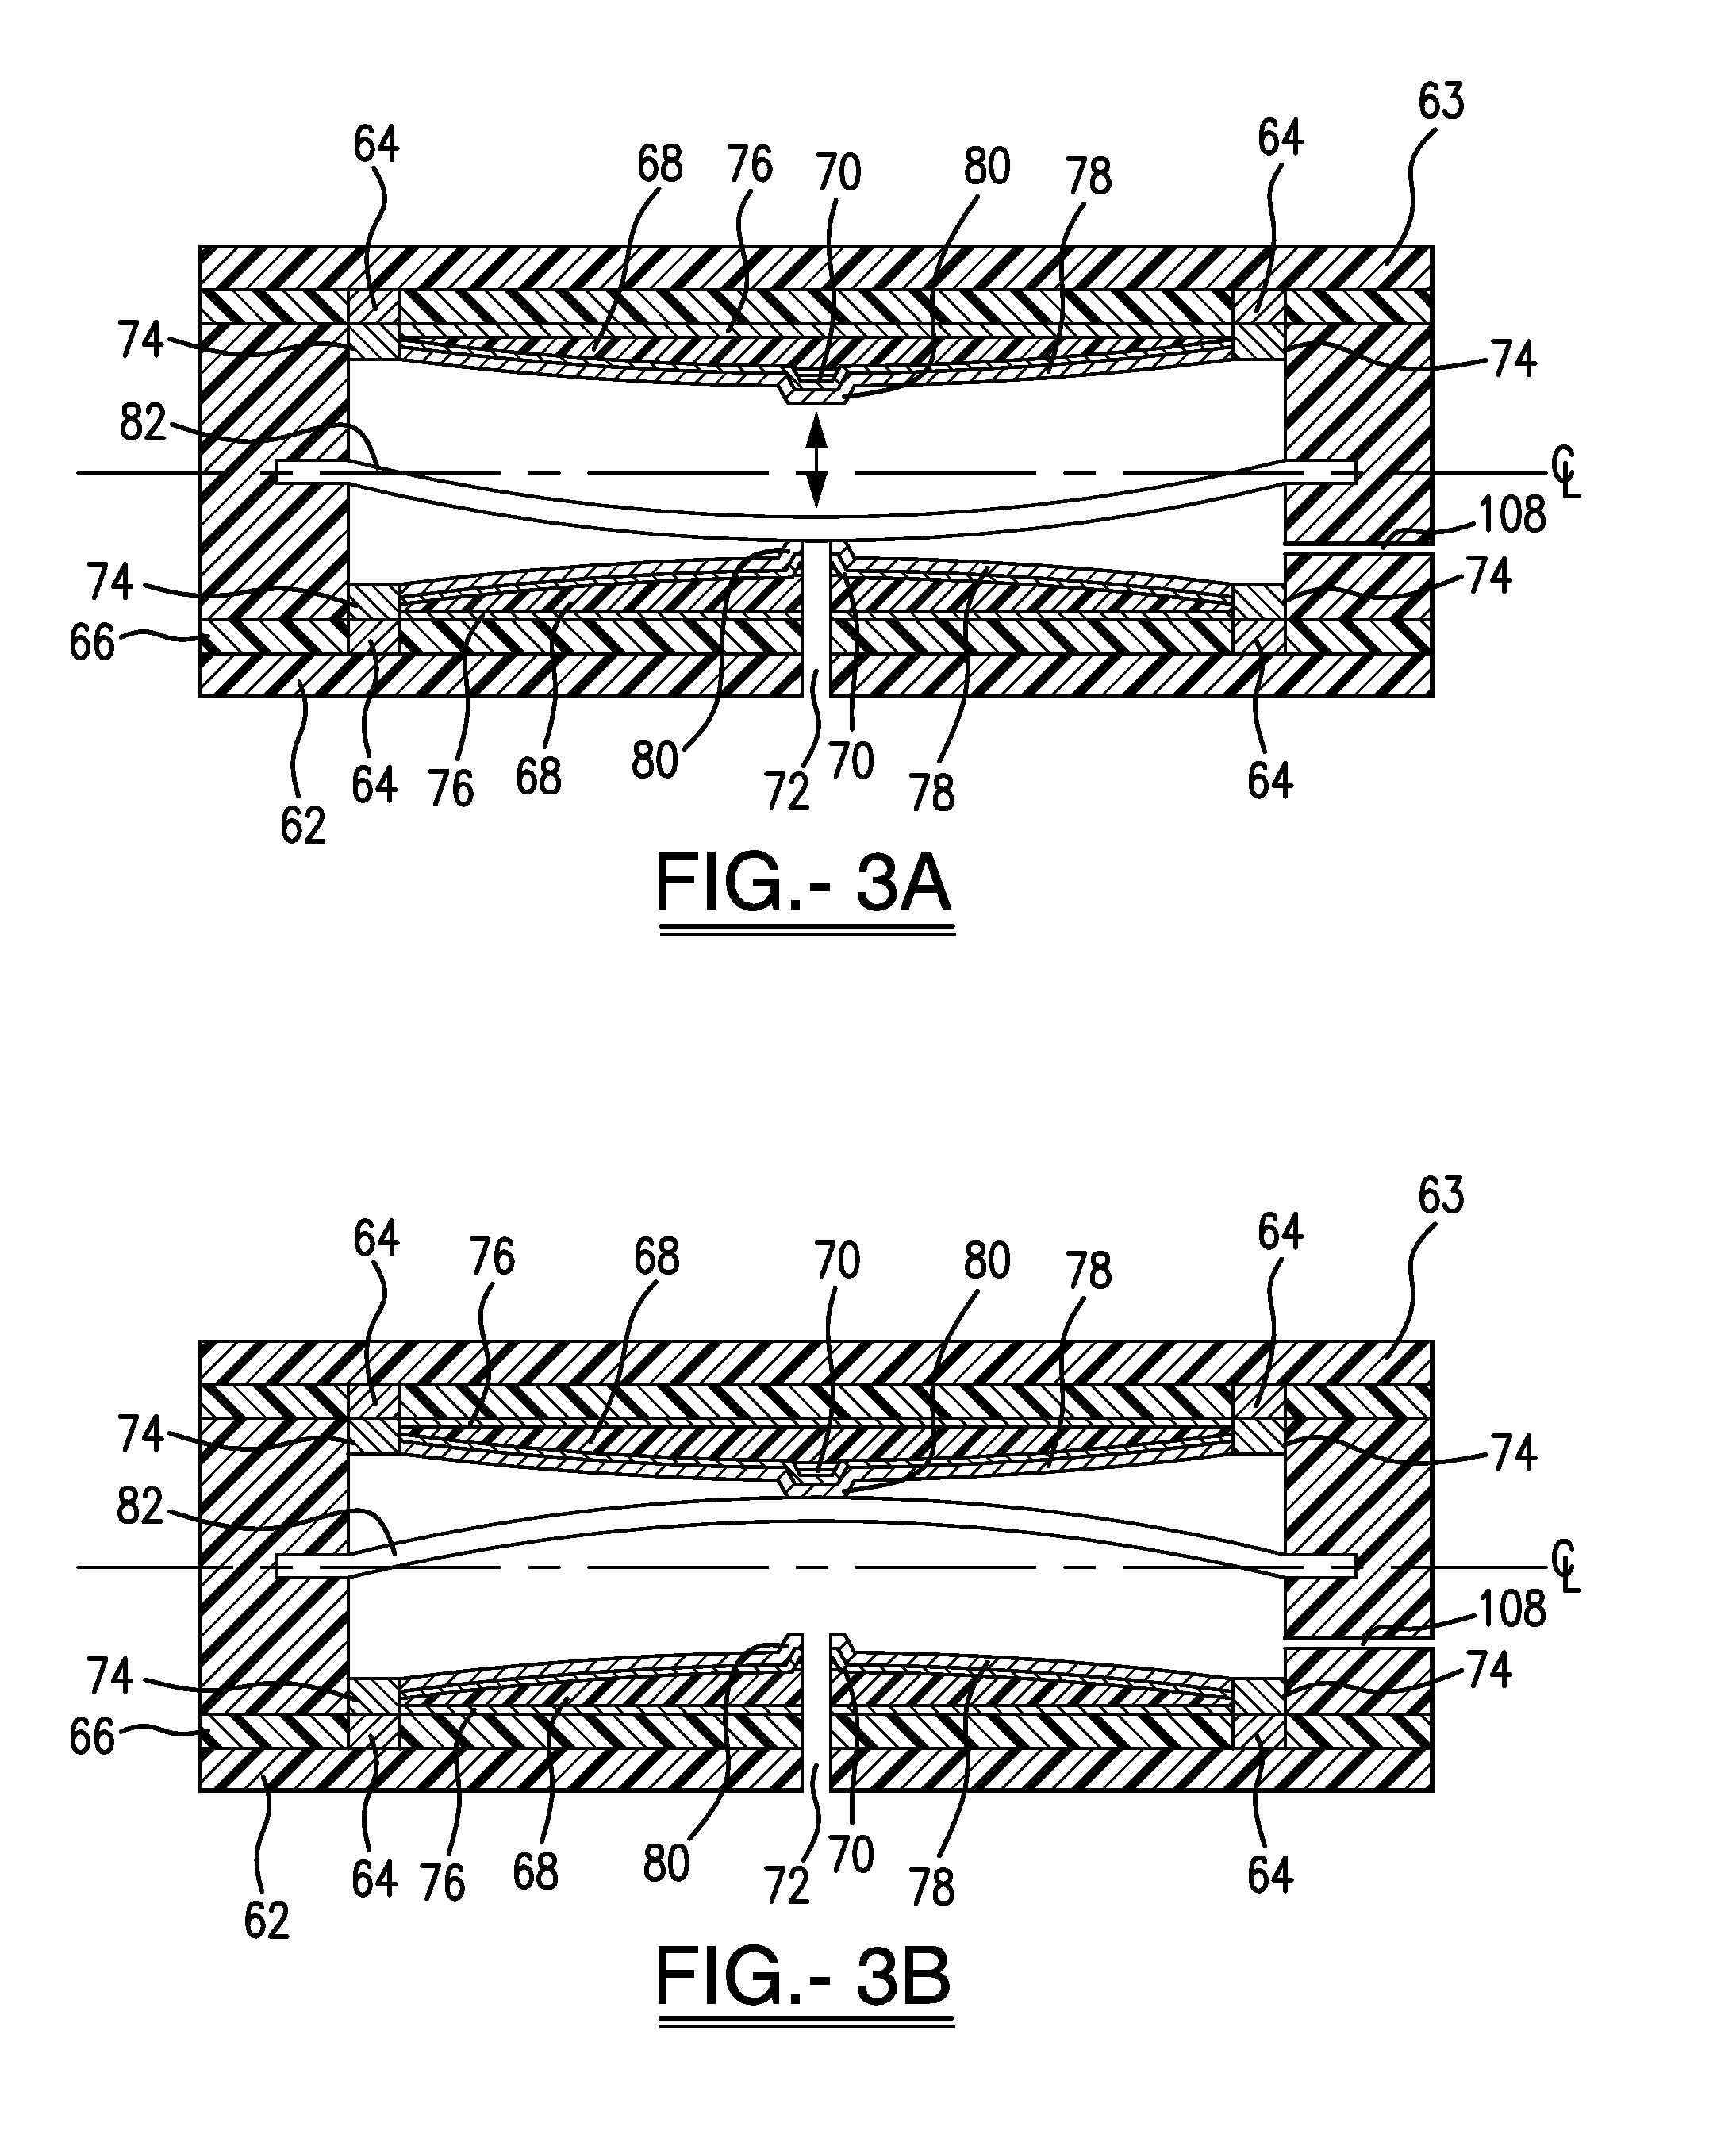 Fluid regulating microvalve assembly for fluid consuming cells with spring-like shape-retaining aperture cover